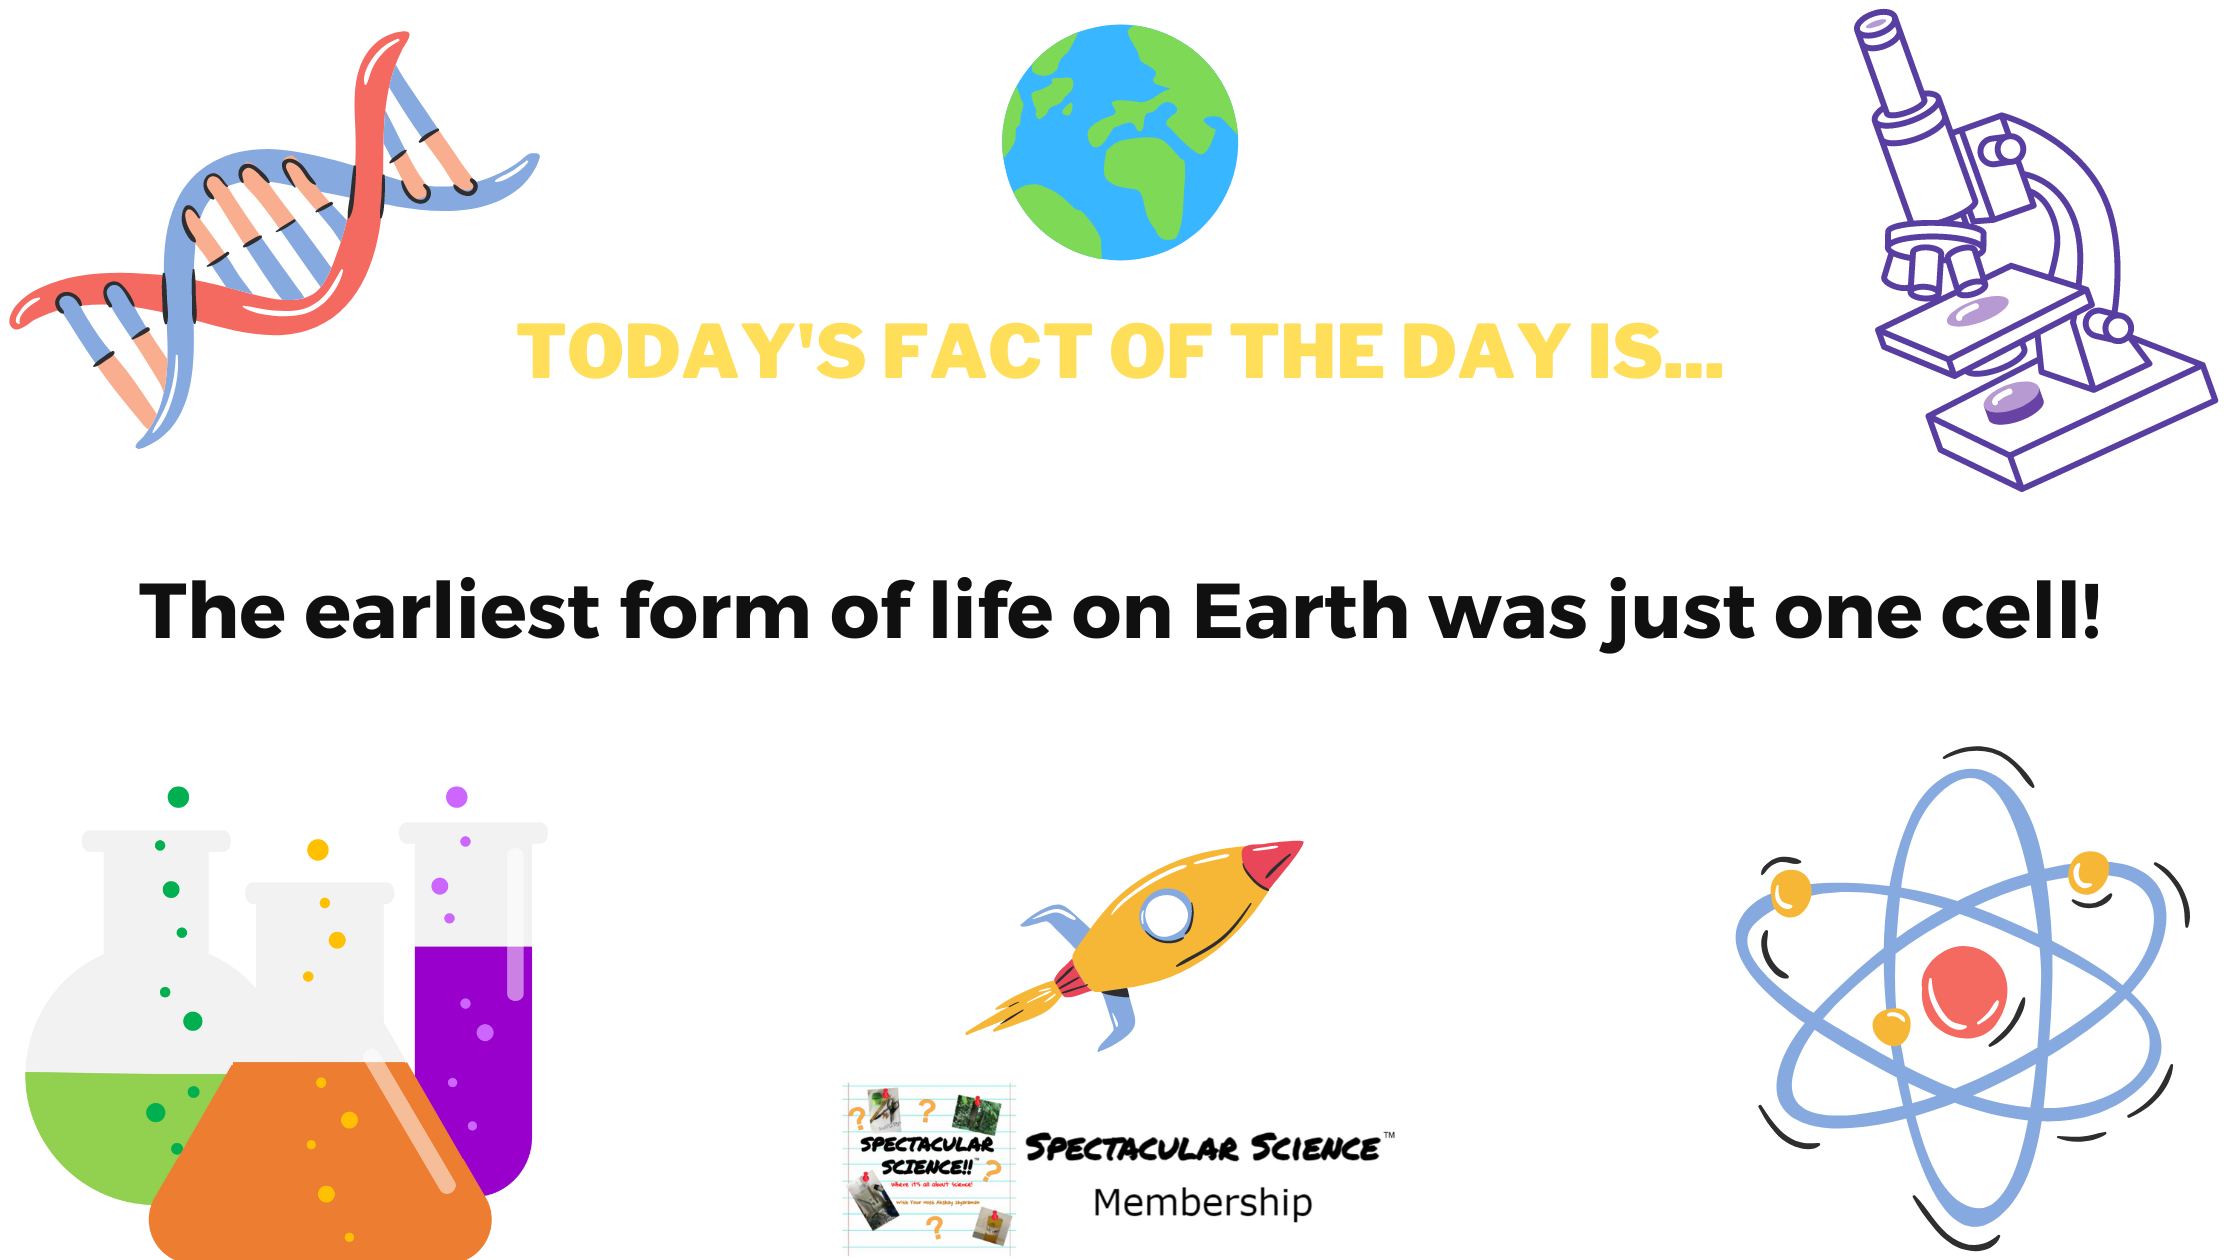 Fact of the Day Image August 25th